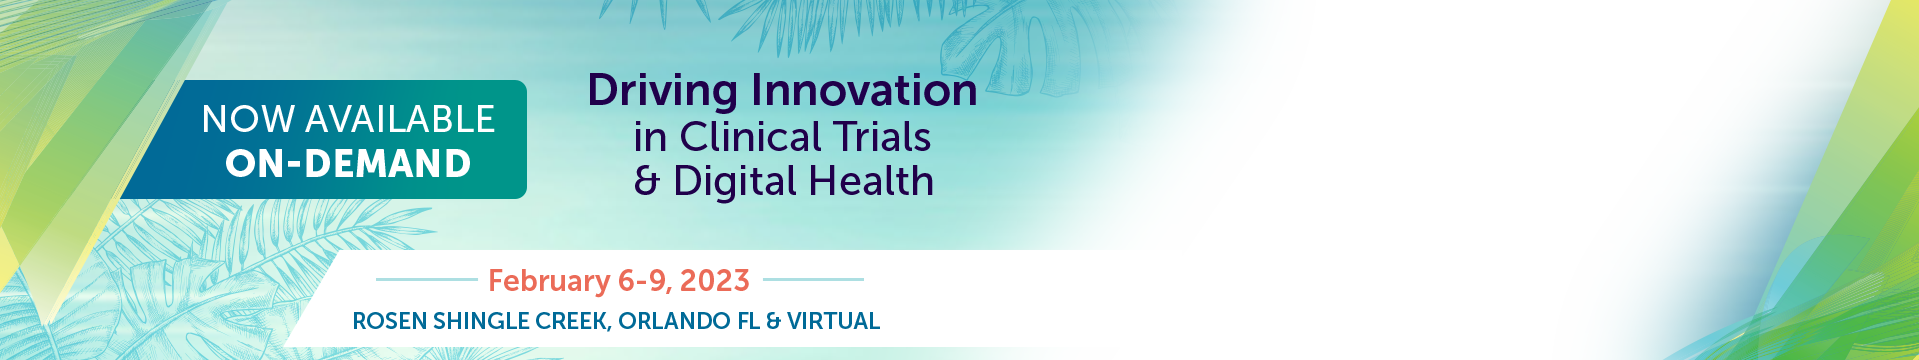 SCOPE Summit - Driving Innovation in Clinical Trials and Digital Health